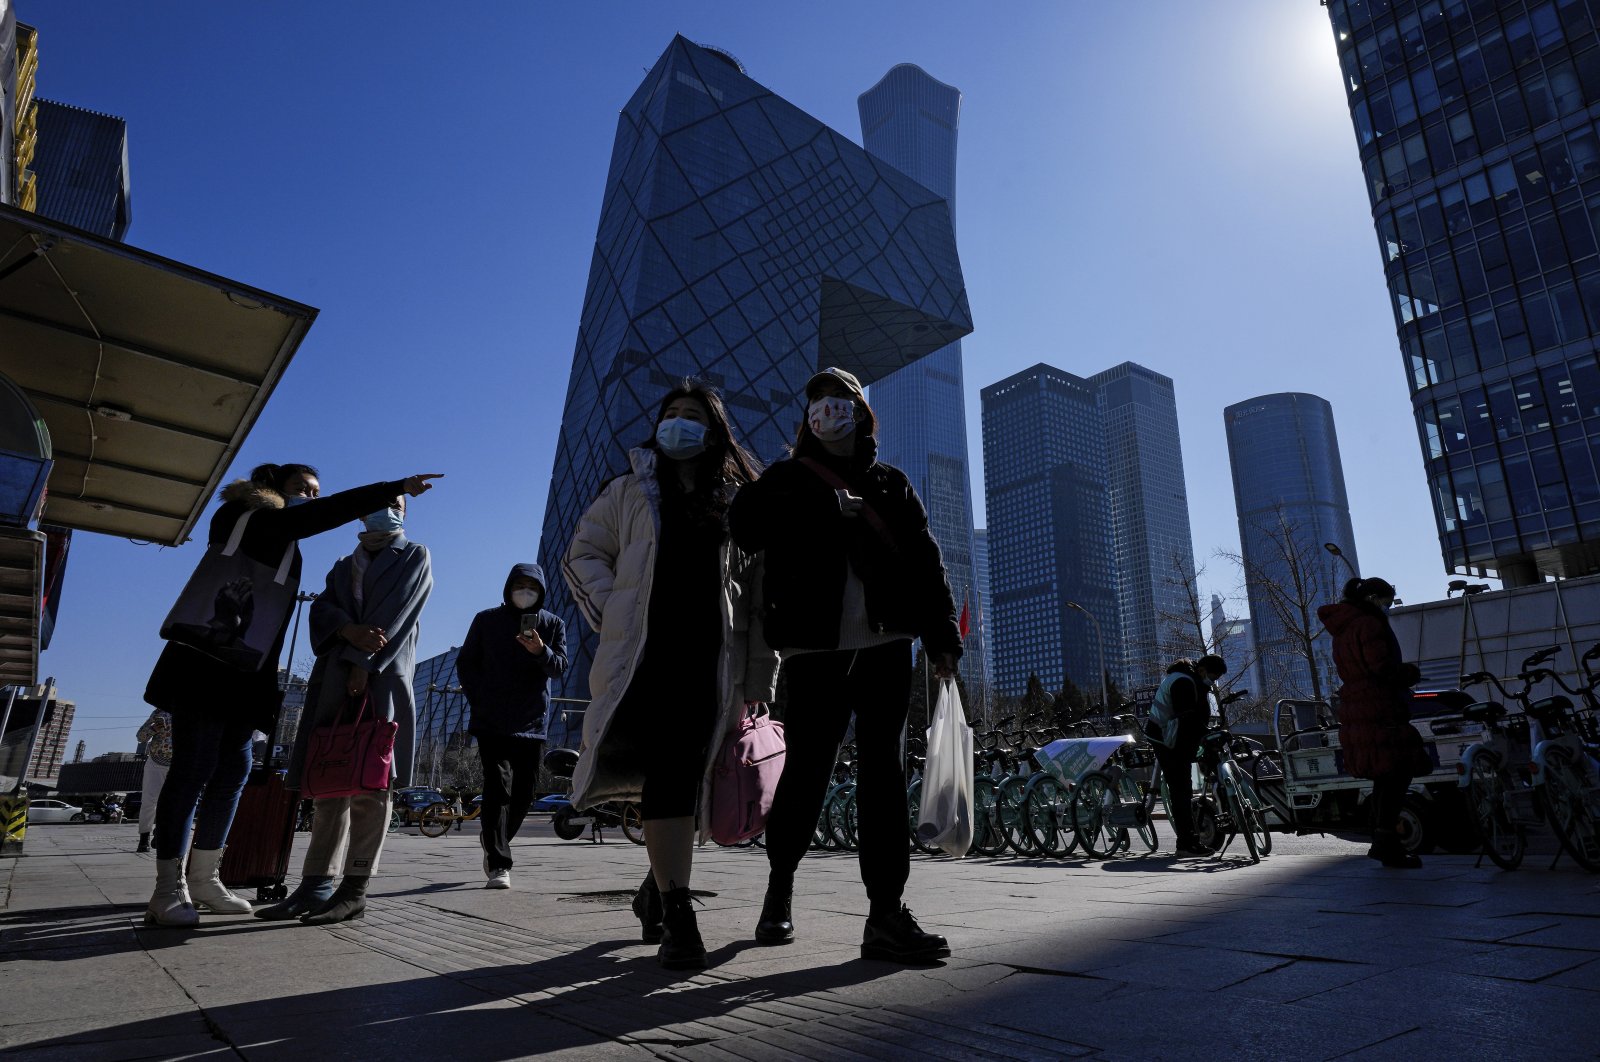 Commuters wearing face masks to help protect from the coronavirus walk by a movable kiosk selling breakfast at the central business district in Beijing, China, Feb. 23, 2022. (AP Photo)